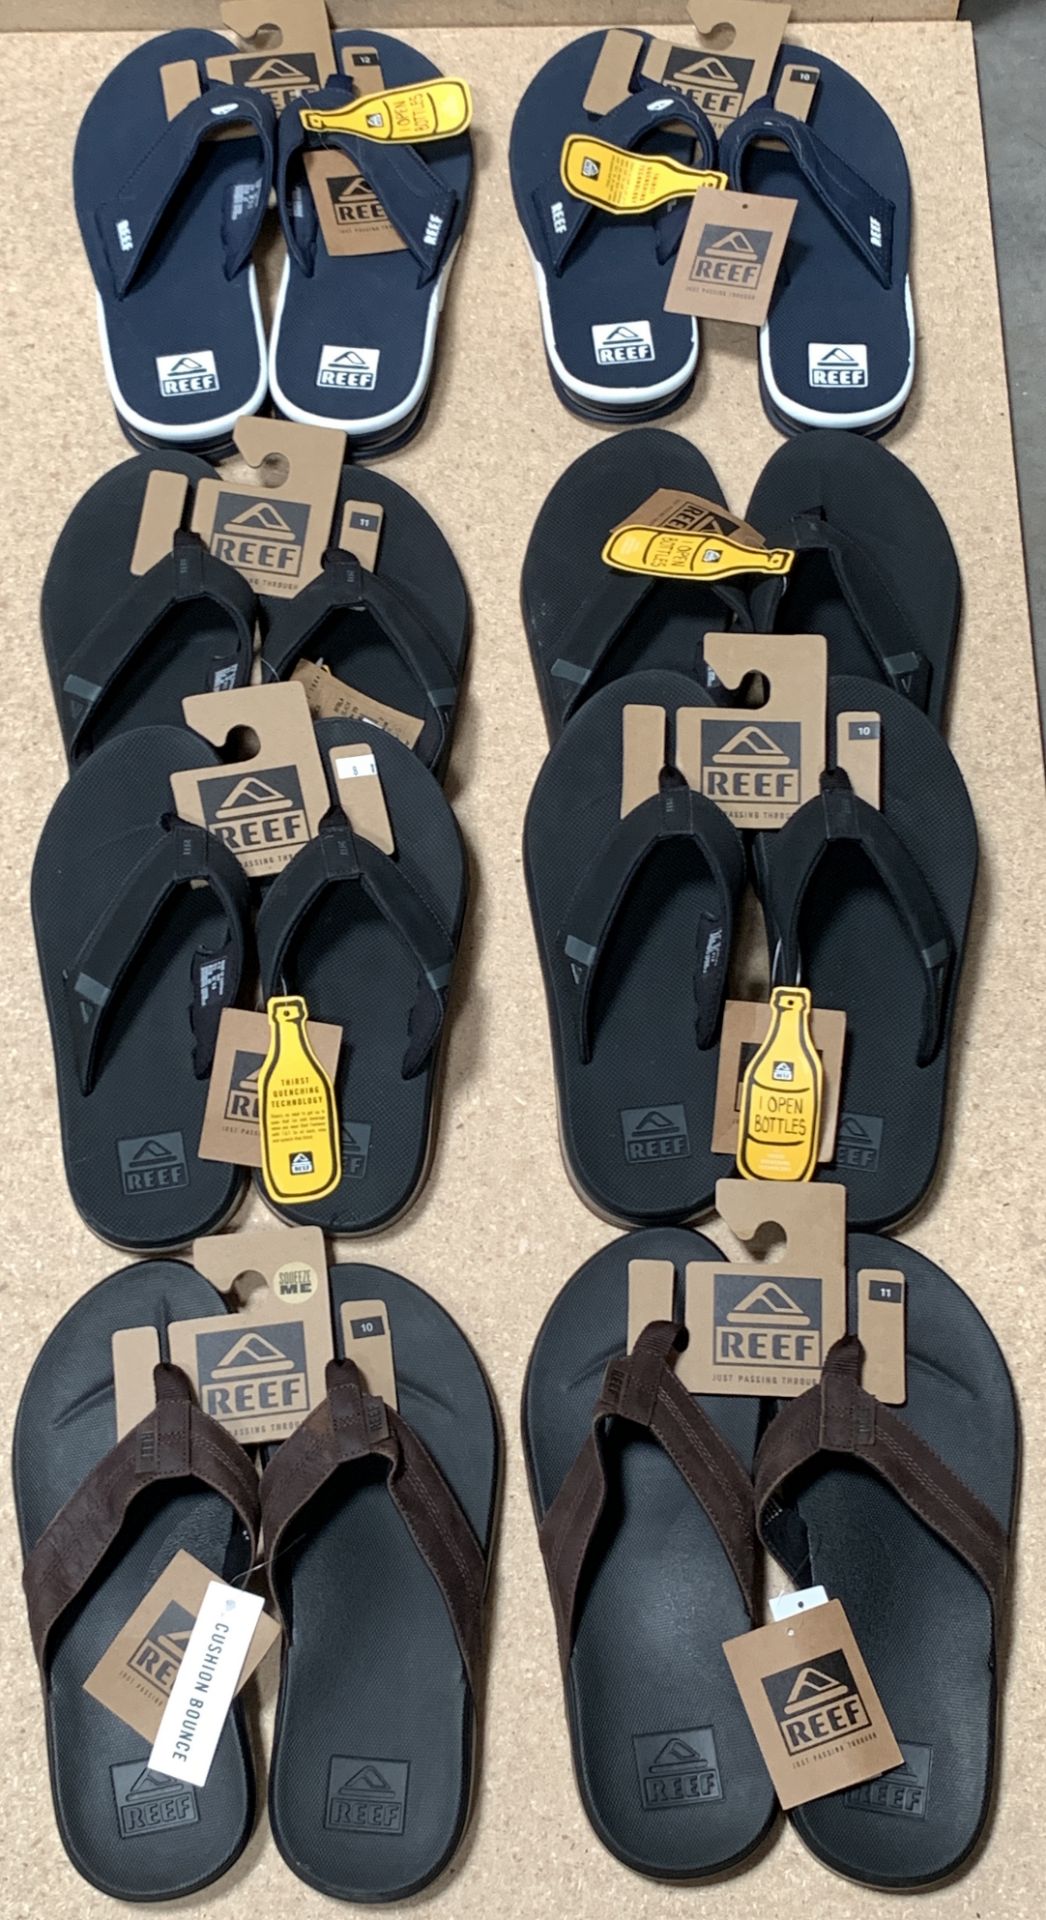 8 Pairs REEF Flip Flop Sandals, New w. Tags, Various Styles and Sizes (Retail $500)